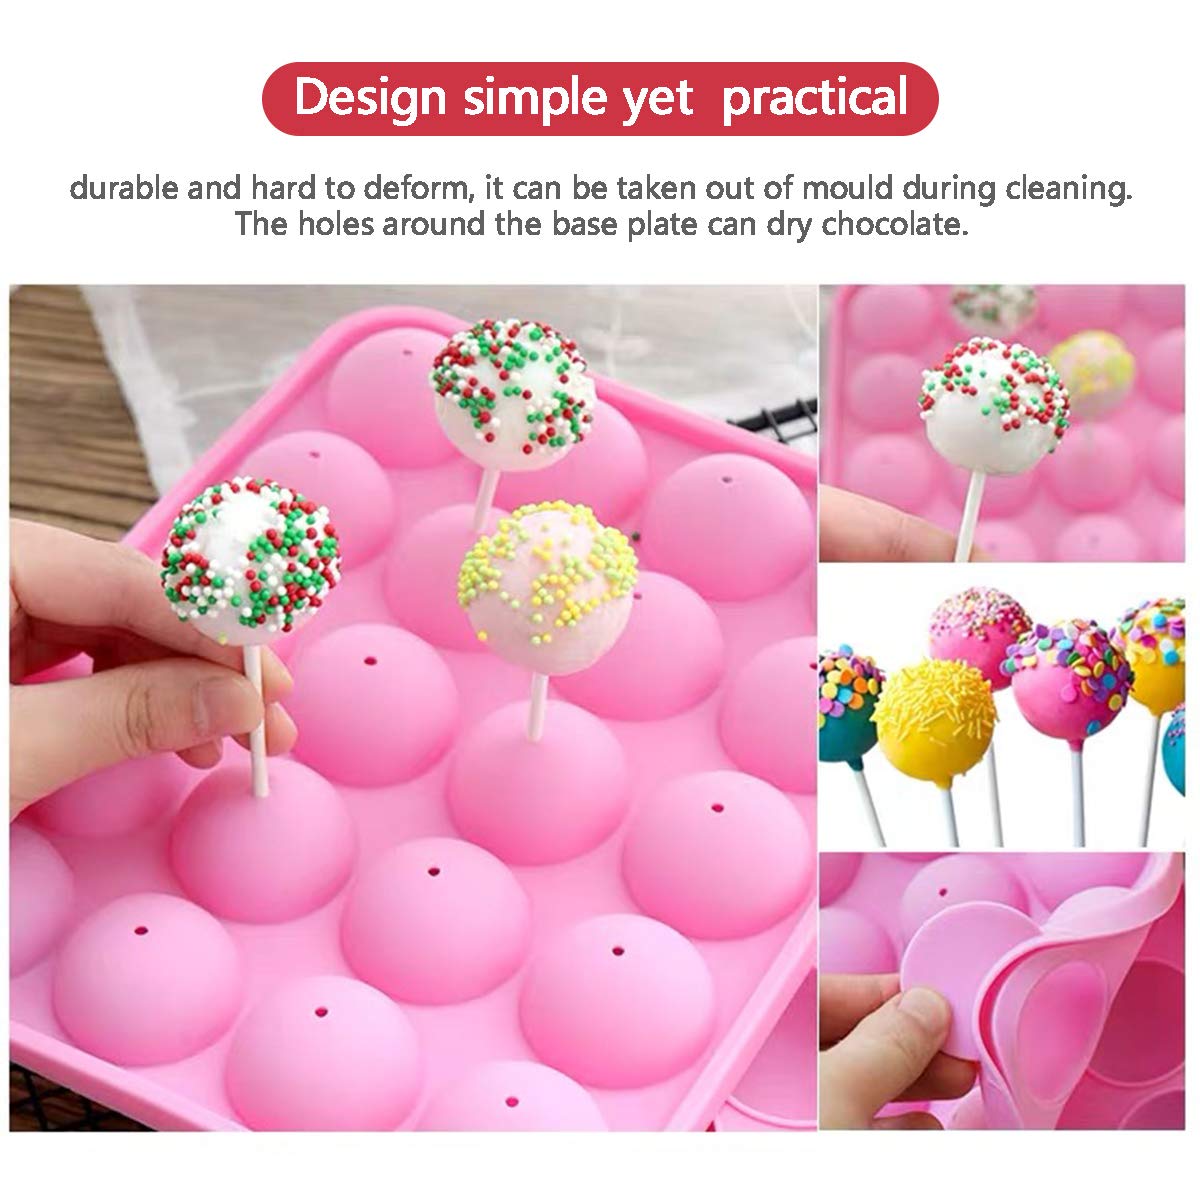 AKINGSHOP 20-Cavity Silicone Cake Pop Mold Set With Lollipop Sticks, Treat Bags, Twist Ties - For Cake Pops, Lollipops, Hard Candy, and Chocolate